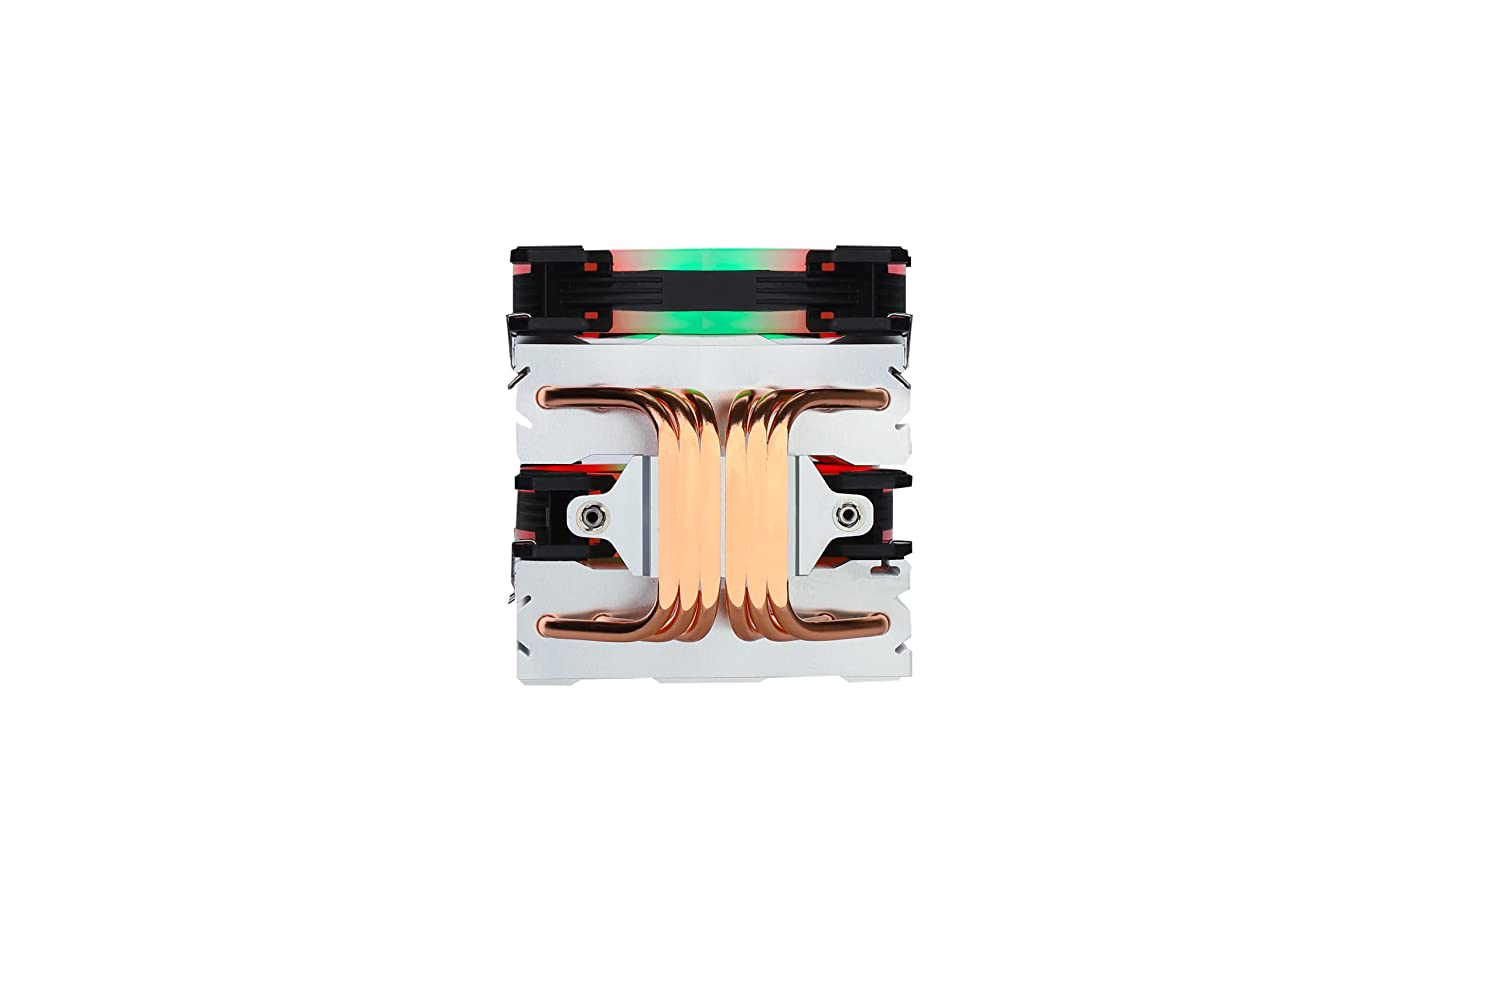 Gelid Solutions Glacier RGB-CPU Cooler-2X120Mm PWM ARGB Fans-Tdp over 220W-Double Ball Bearing-Rpm 1600-Color Silver